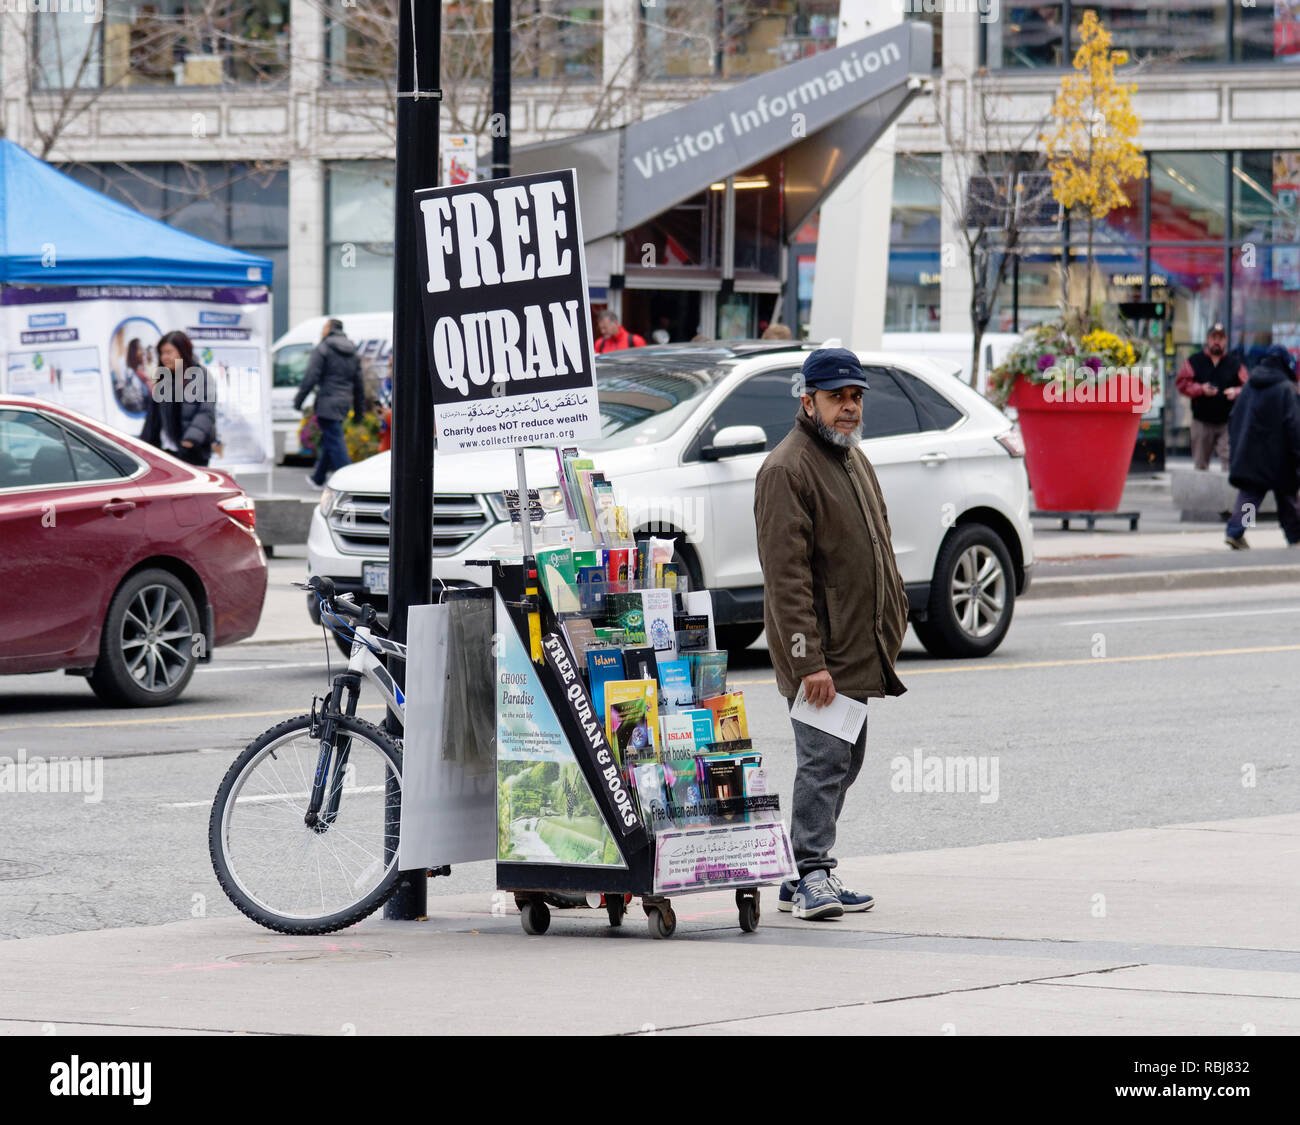 A muslim man at a street stand giving away free copies of the Koran, Toronto, Canada Stock Photo